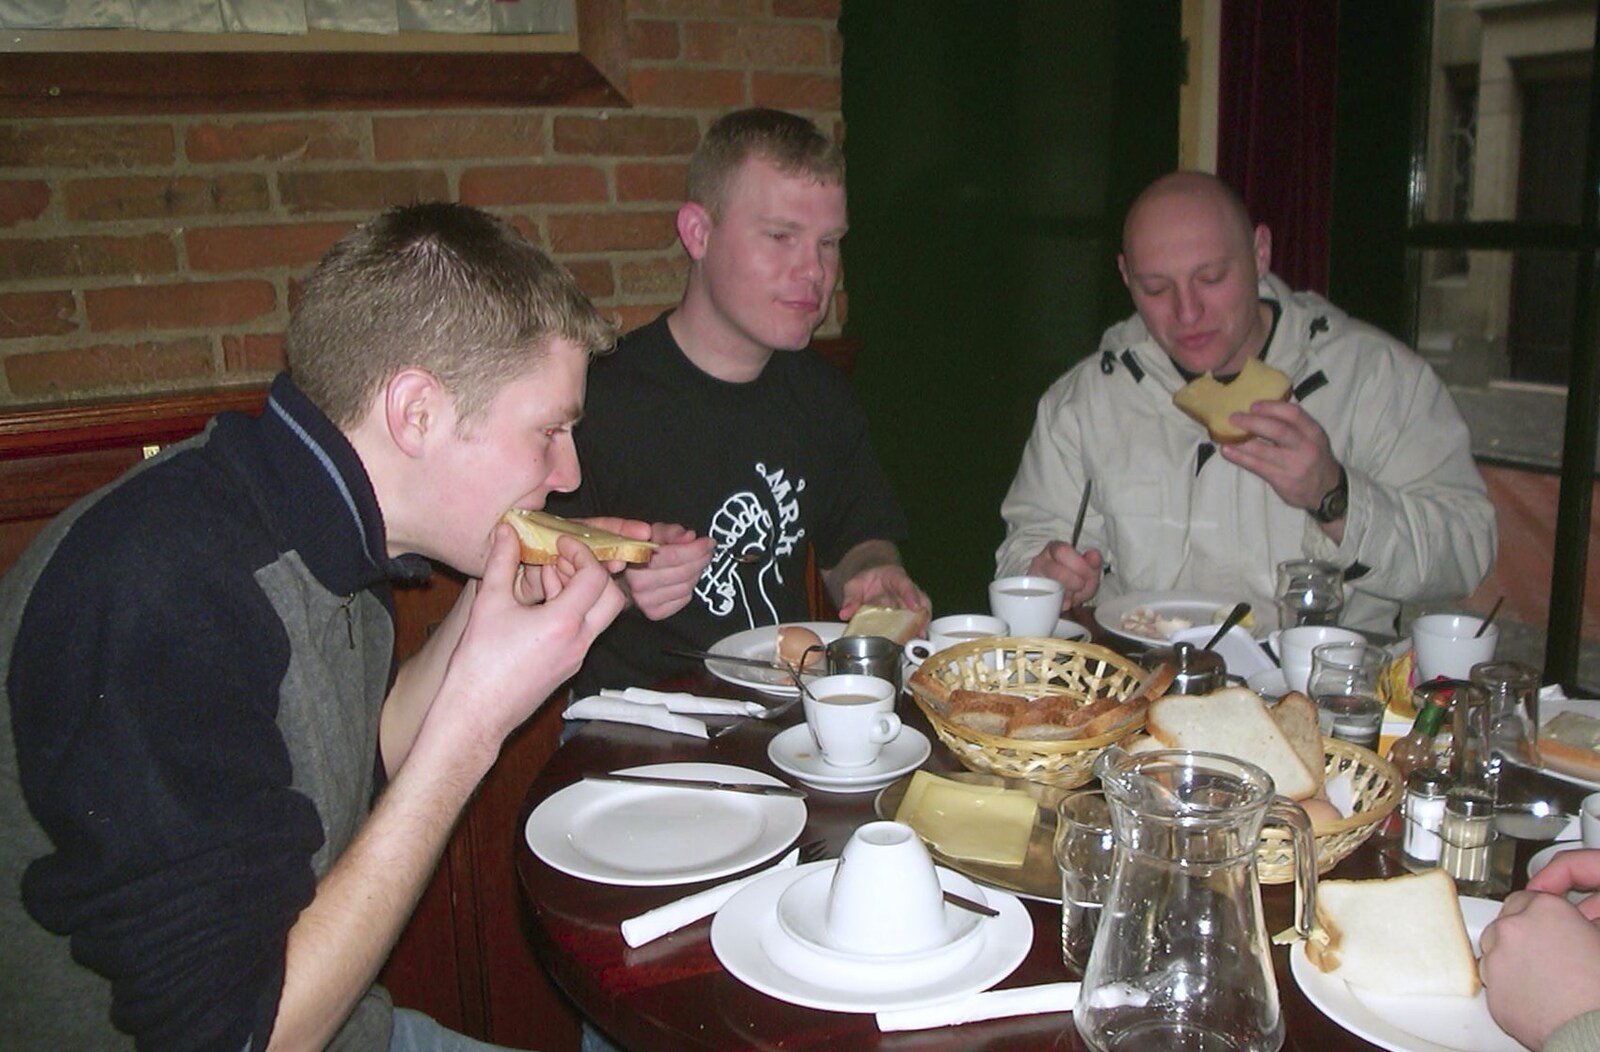 It's toast and cheese for breakfast from Anne Frank, Markets and Mikey-P's Stag Do, Amsterdam, Netherlands - 6th March 2004